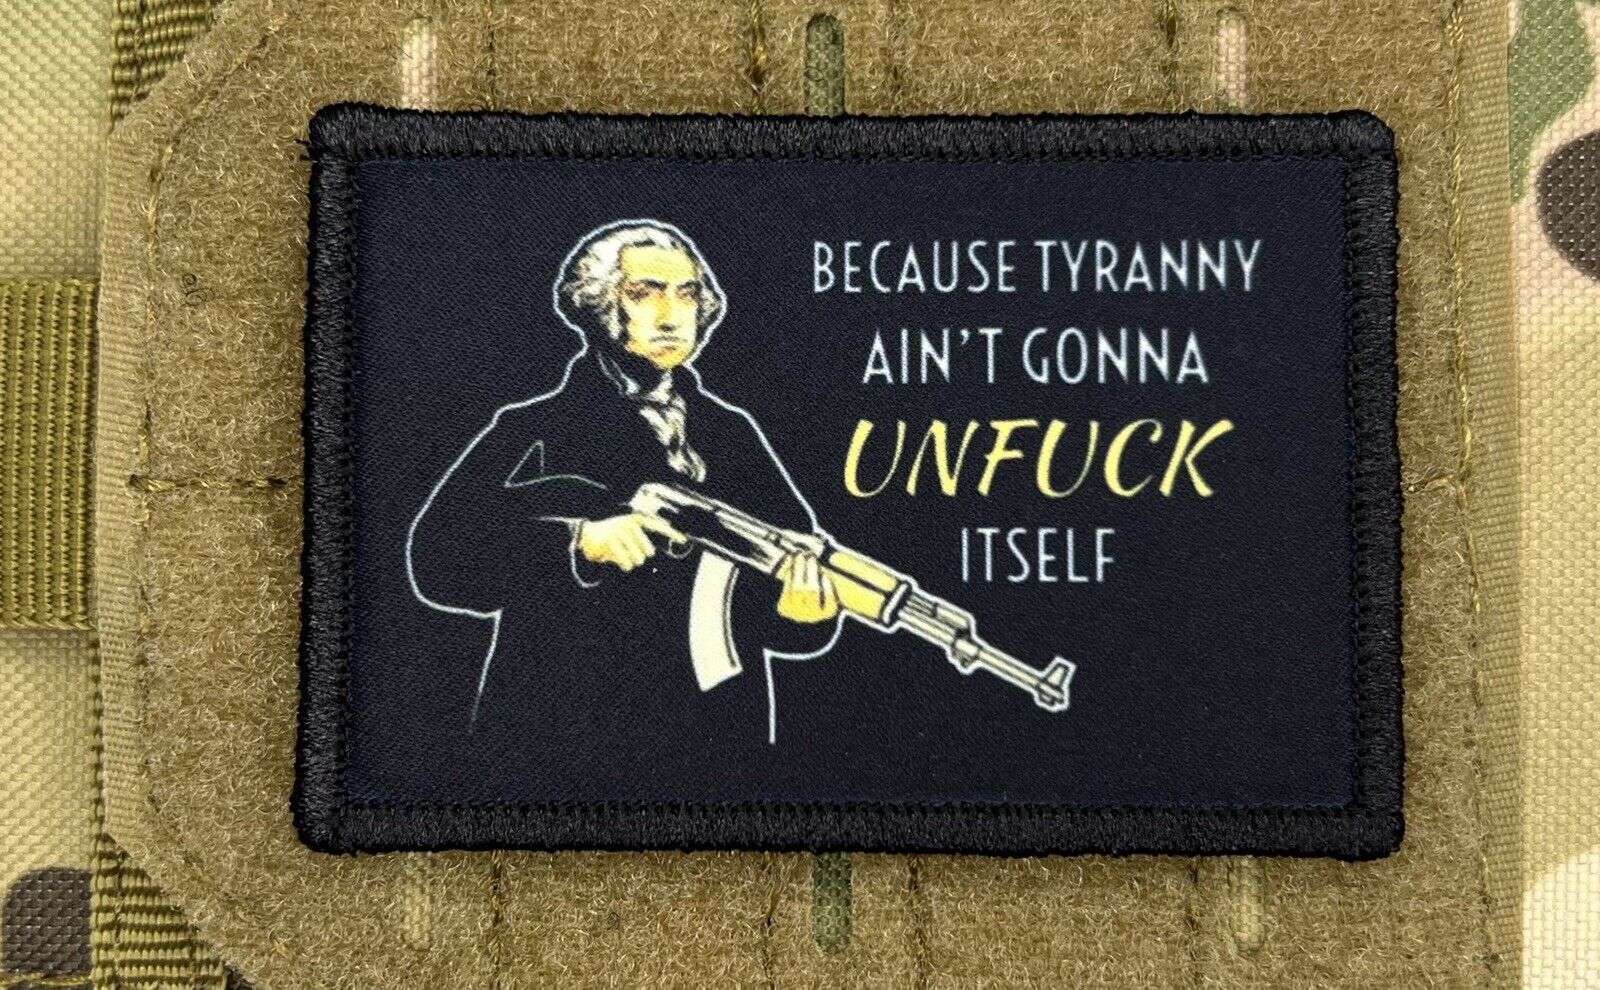 George Washington tyranny Morale Patch / Military Badge ARMY Tactical 159